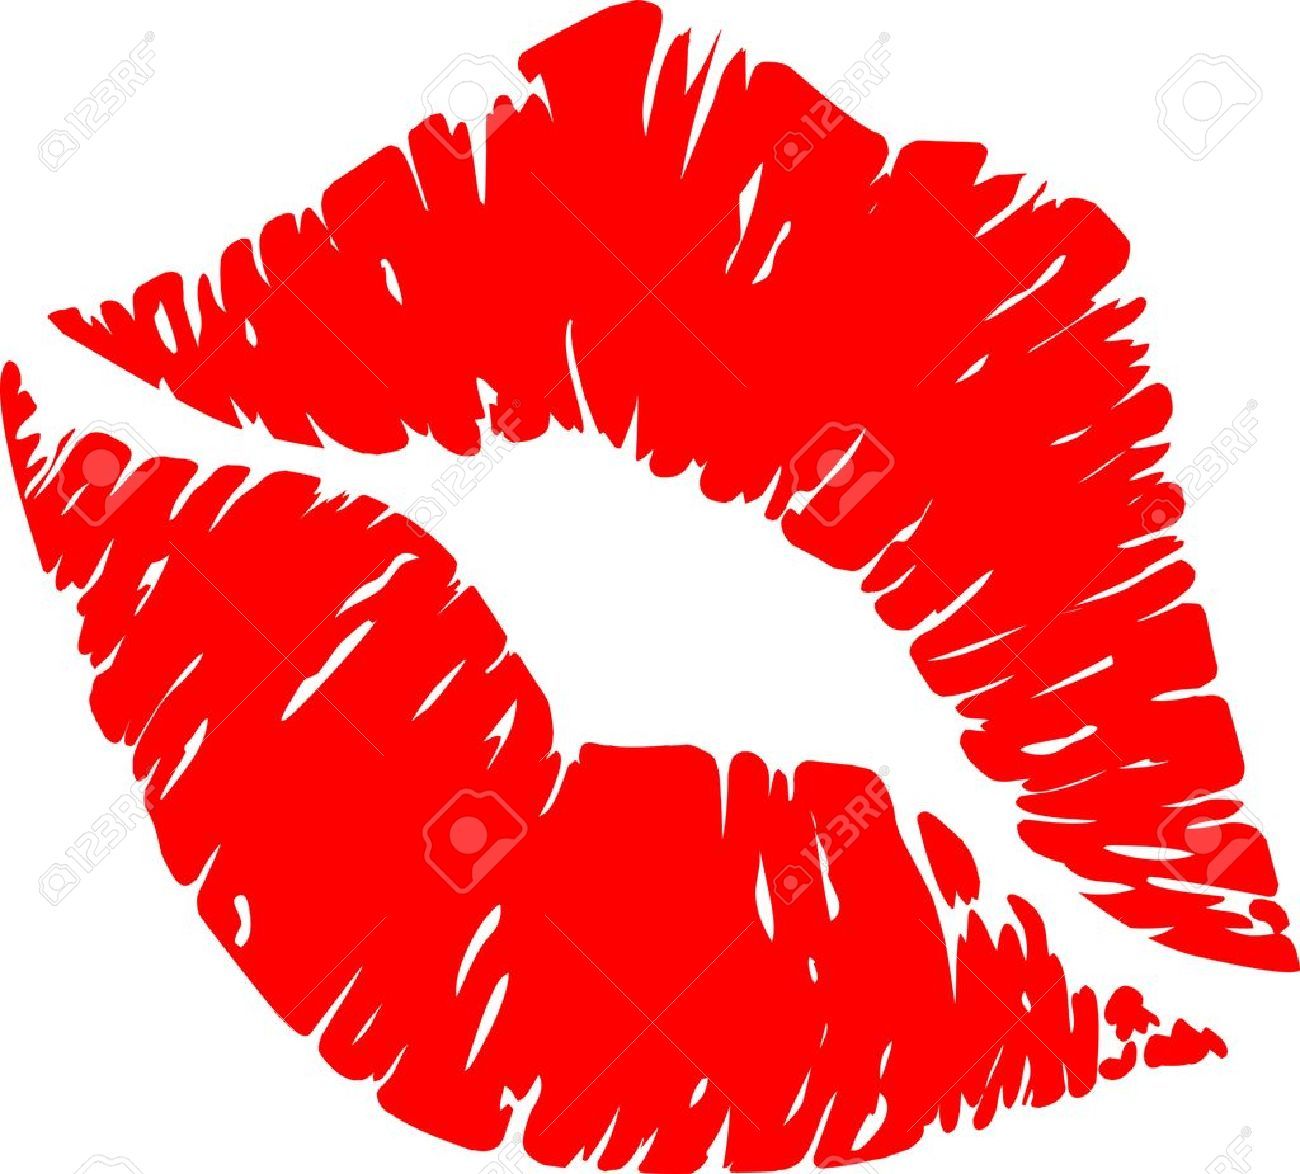 Red lips kiss clipart - ClipartFest